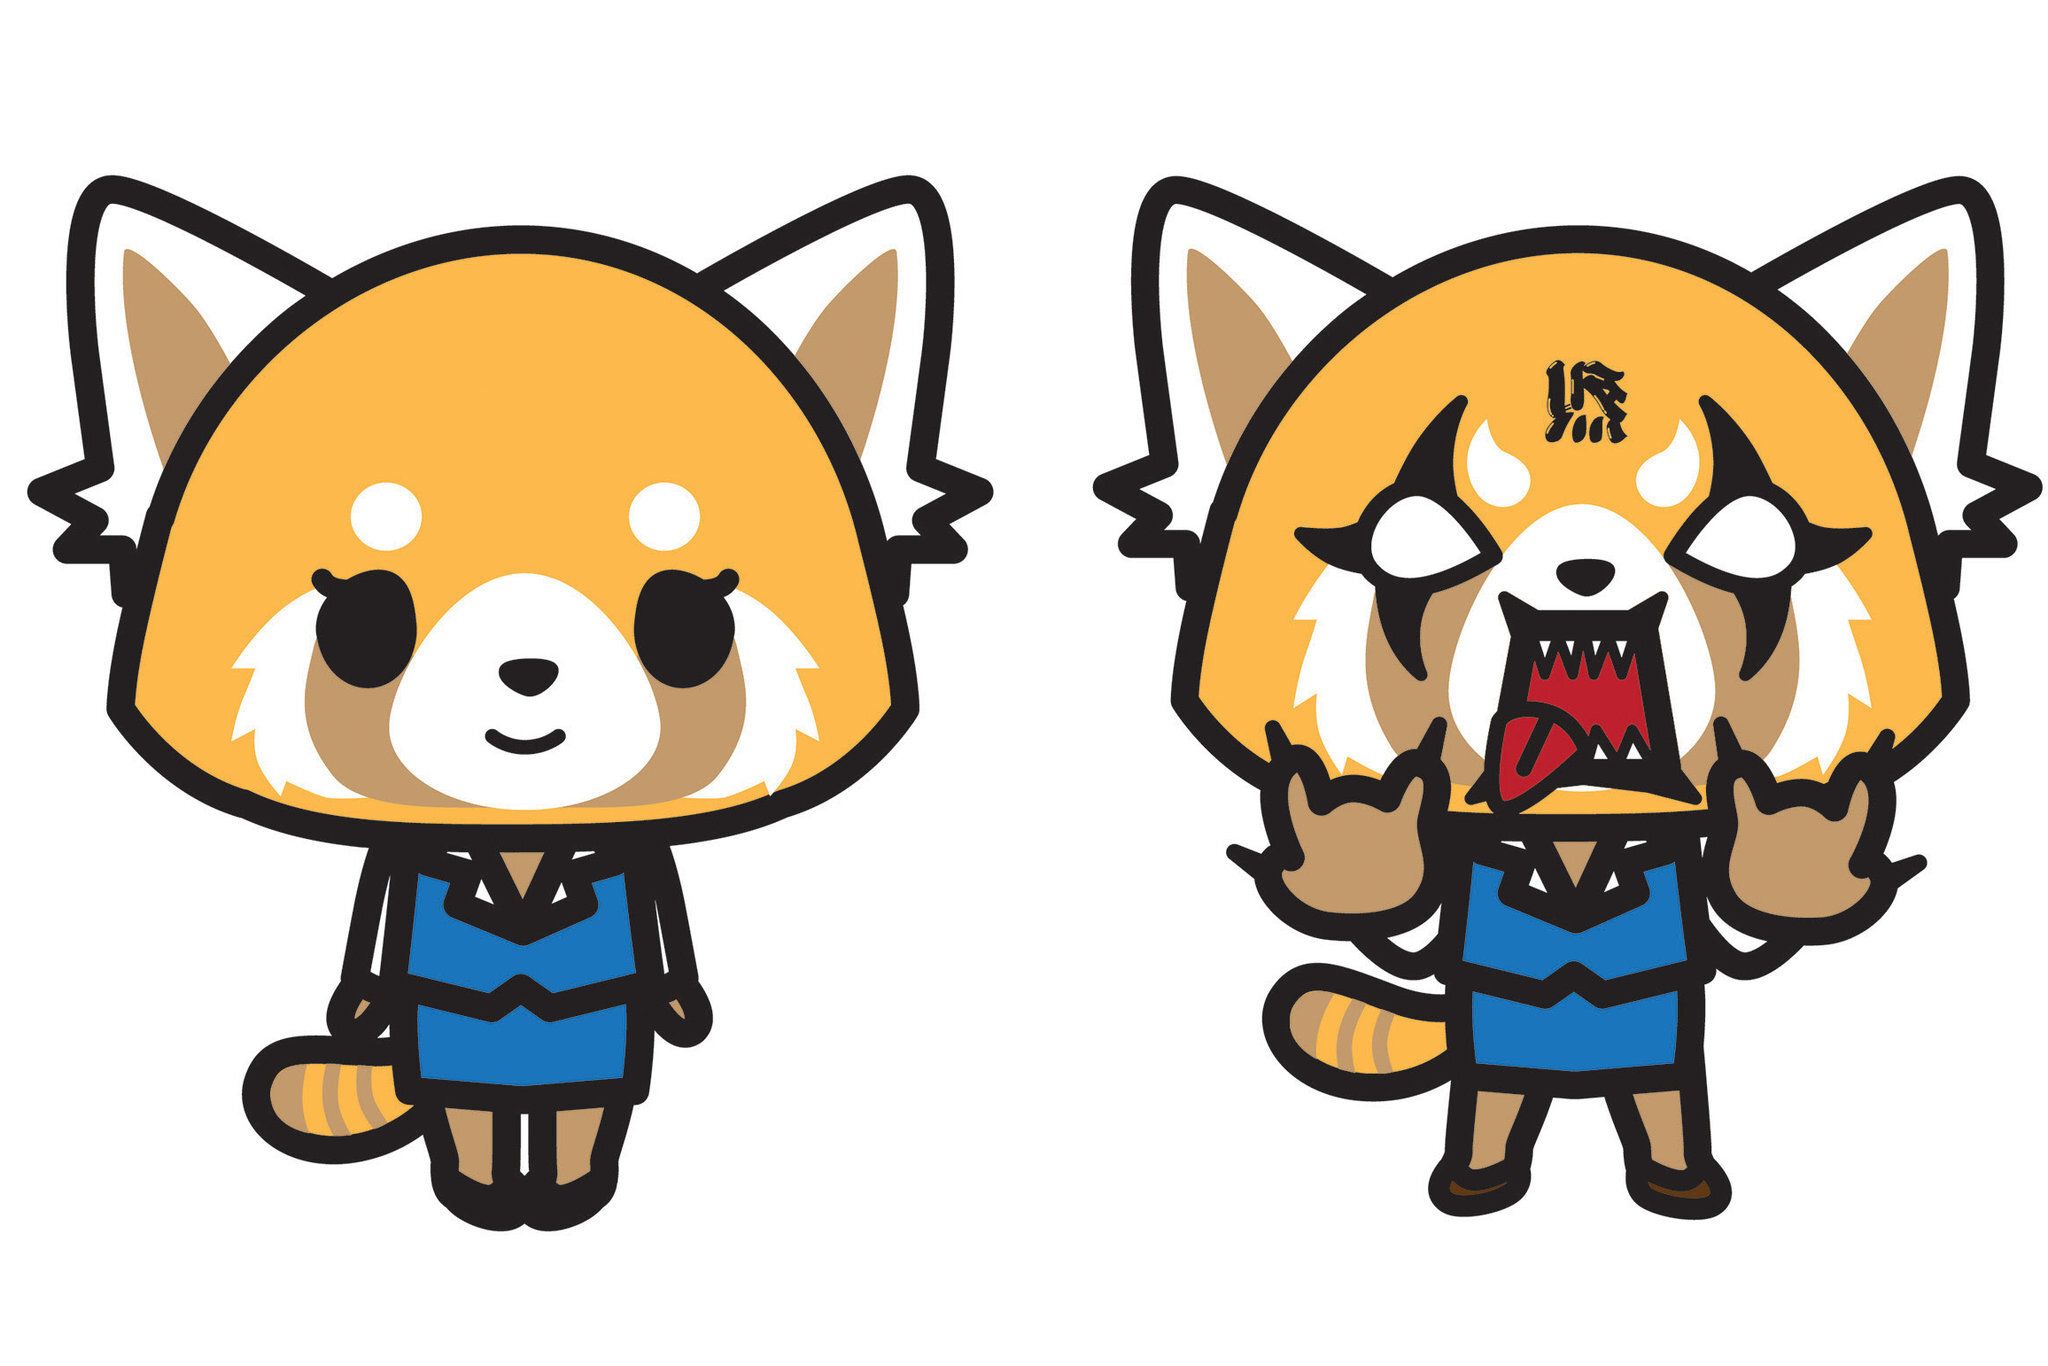 Aggretsuko smiling at the camera and then Aggretsuko raging at the camera